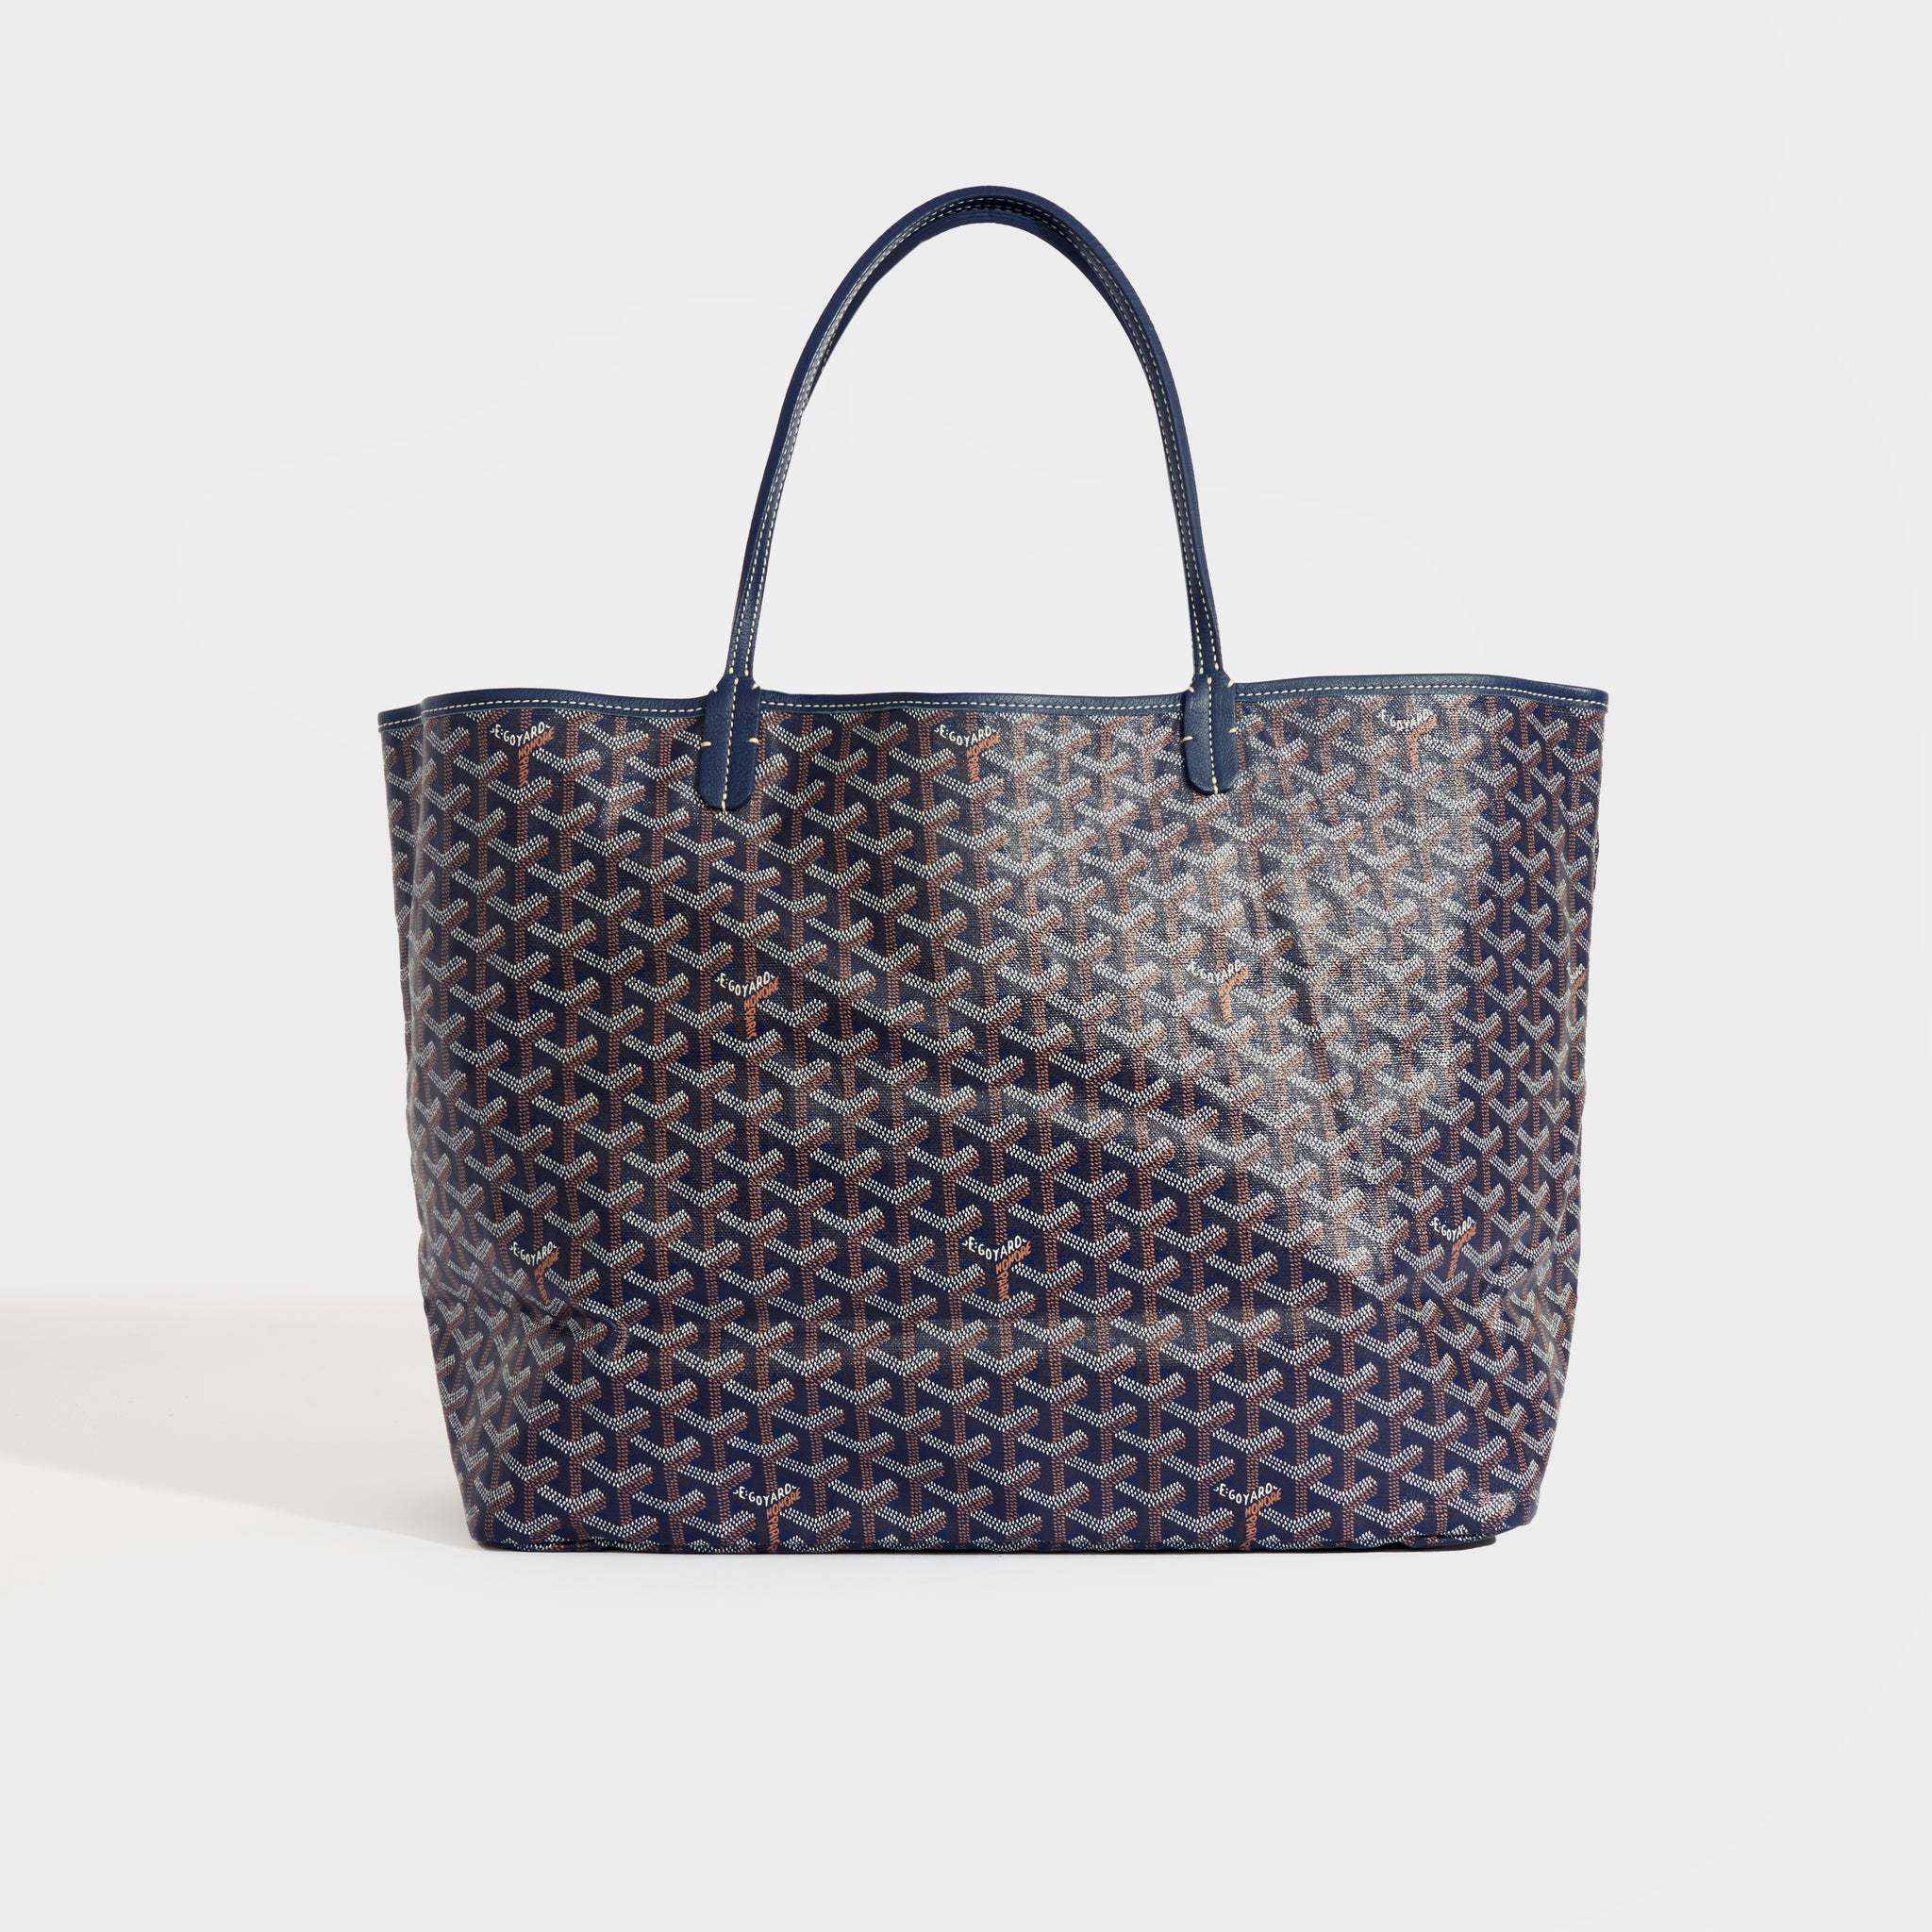 The Goyard Tote - Great For The Weekend! - IT'S SO CLUTCH